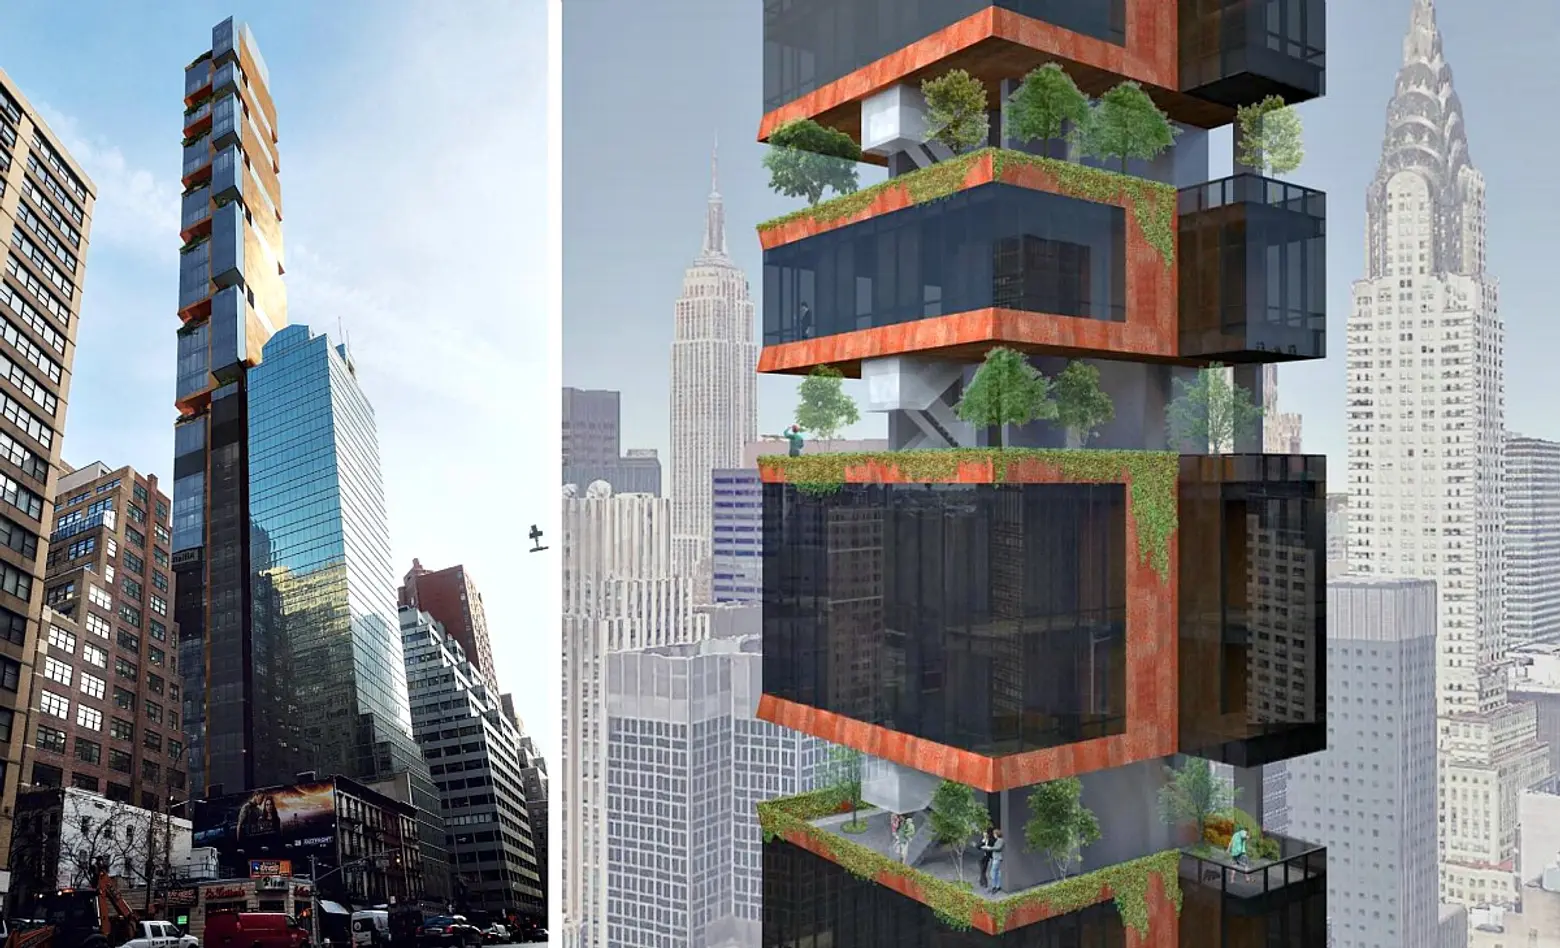 United Nations Tower Has Floating Wrap-Around Gardens, Will Be New World’s Skinniest Tower